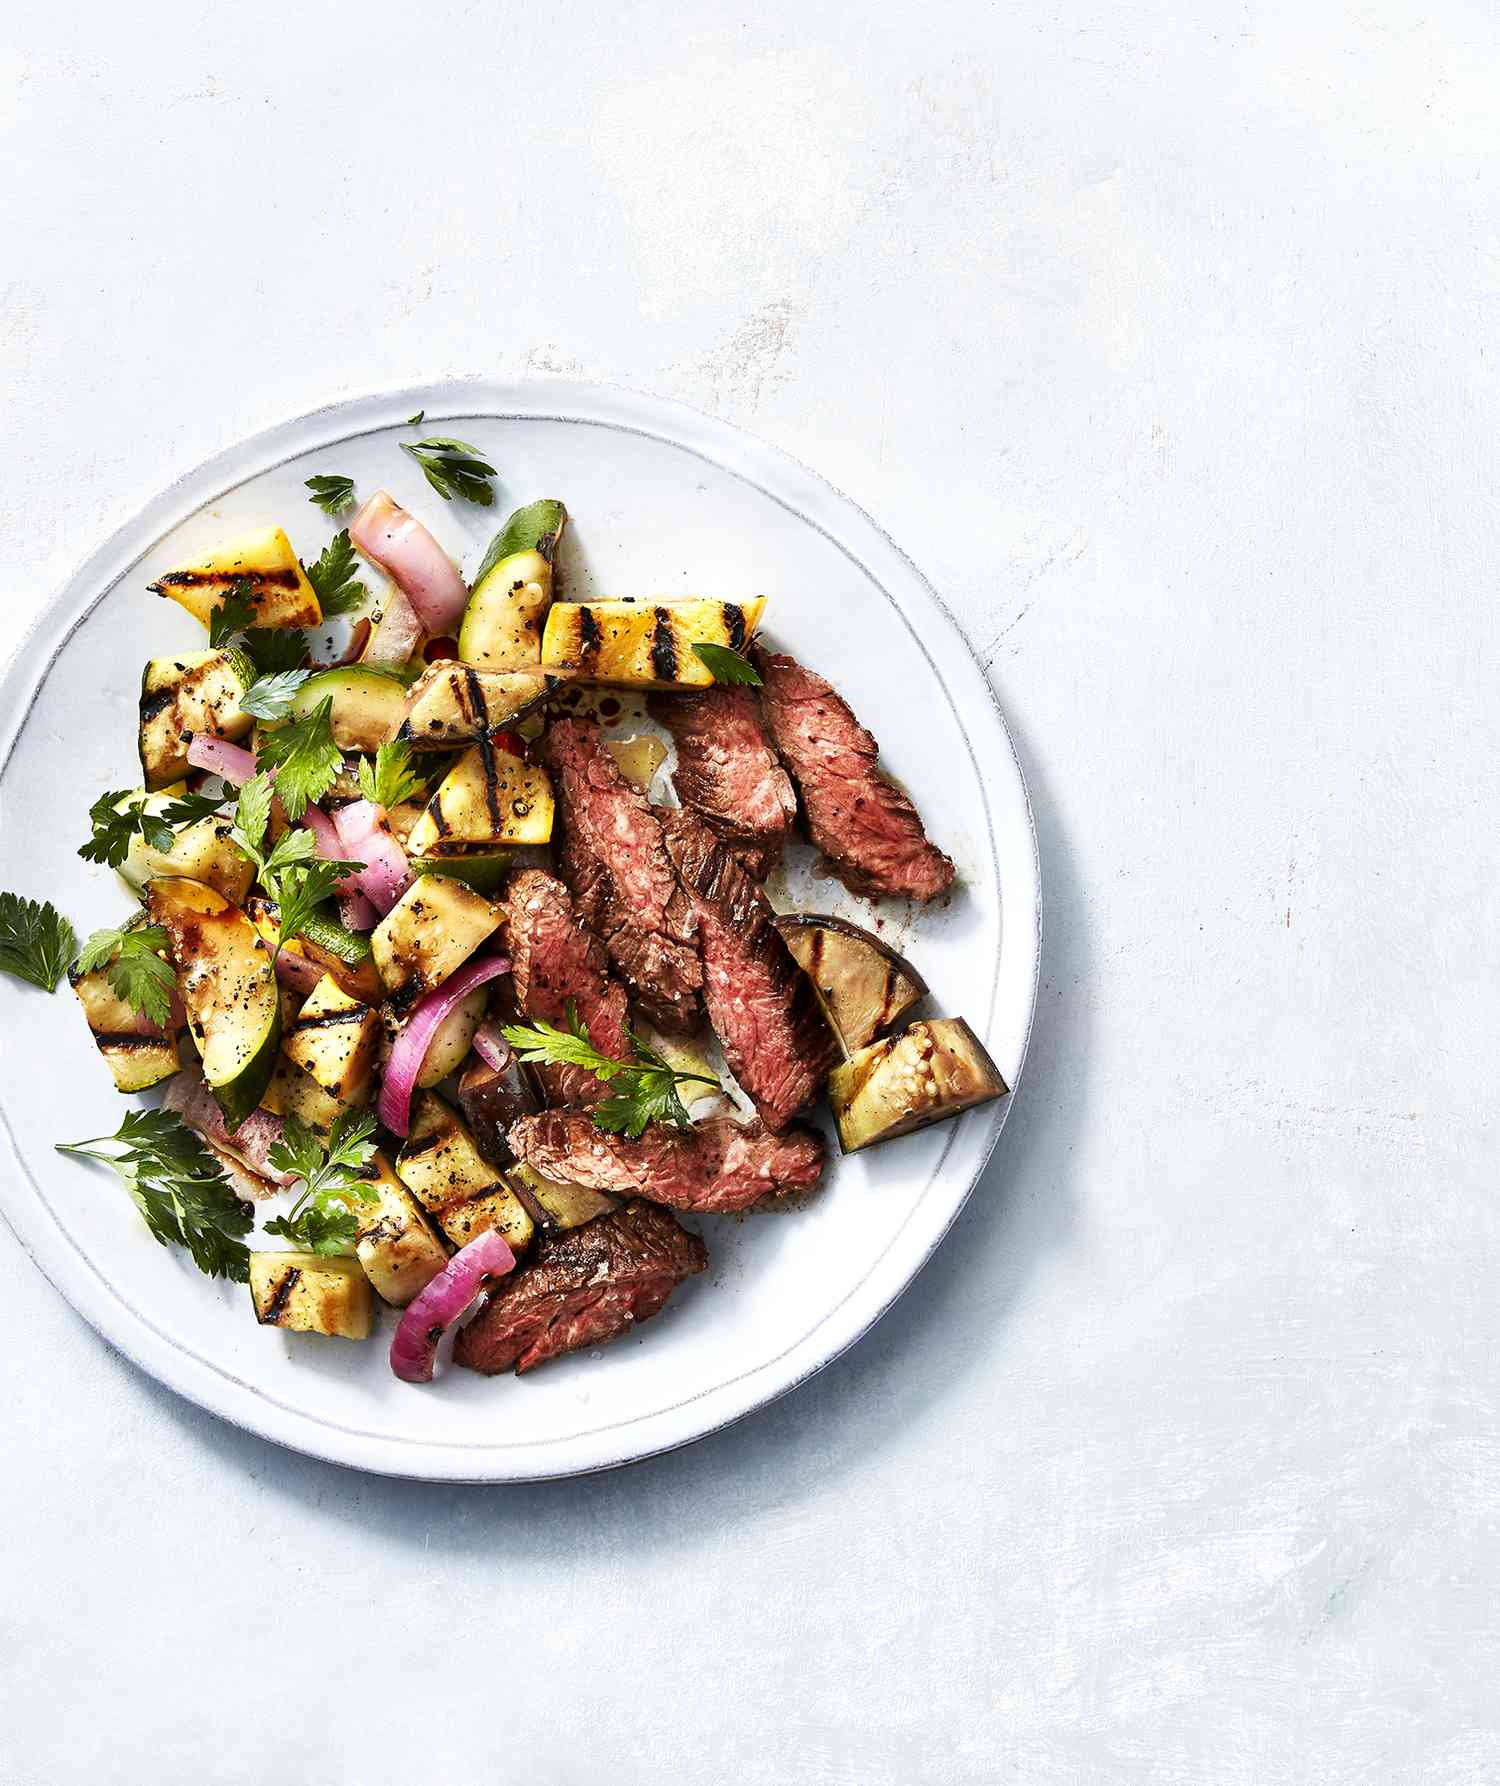 Grilled Skirt Steak With Squash Ratatouille